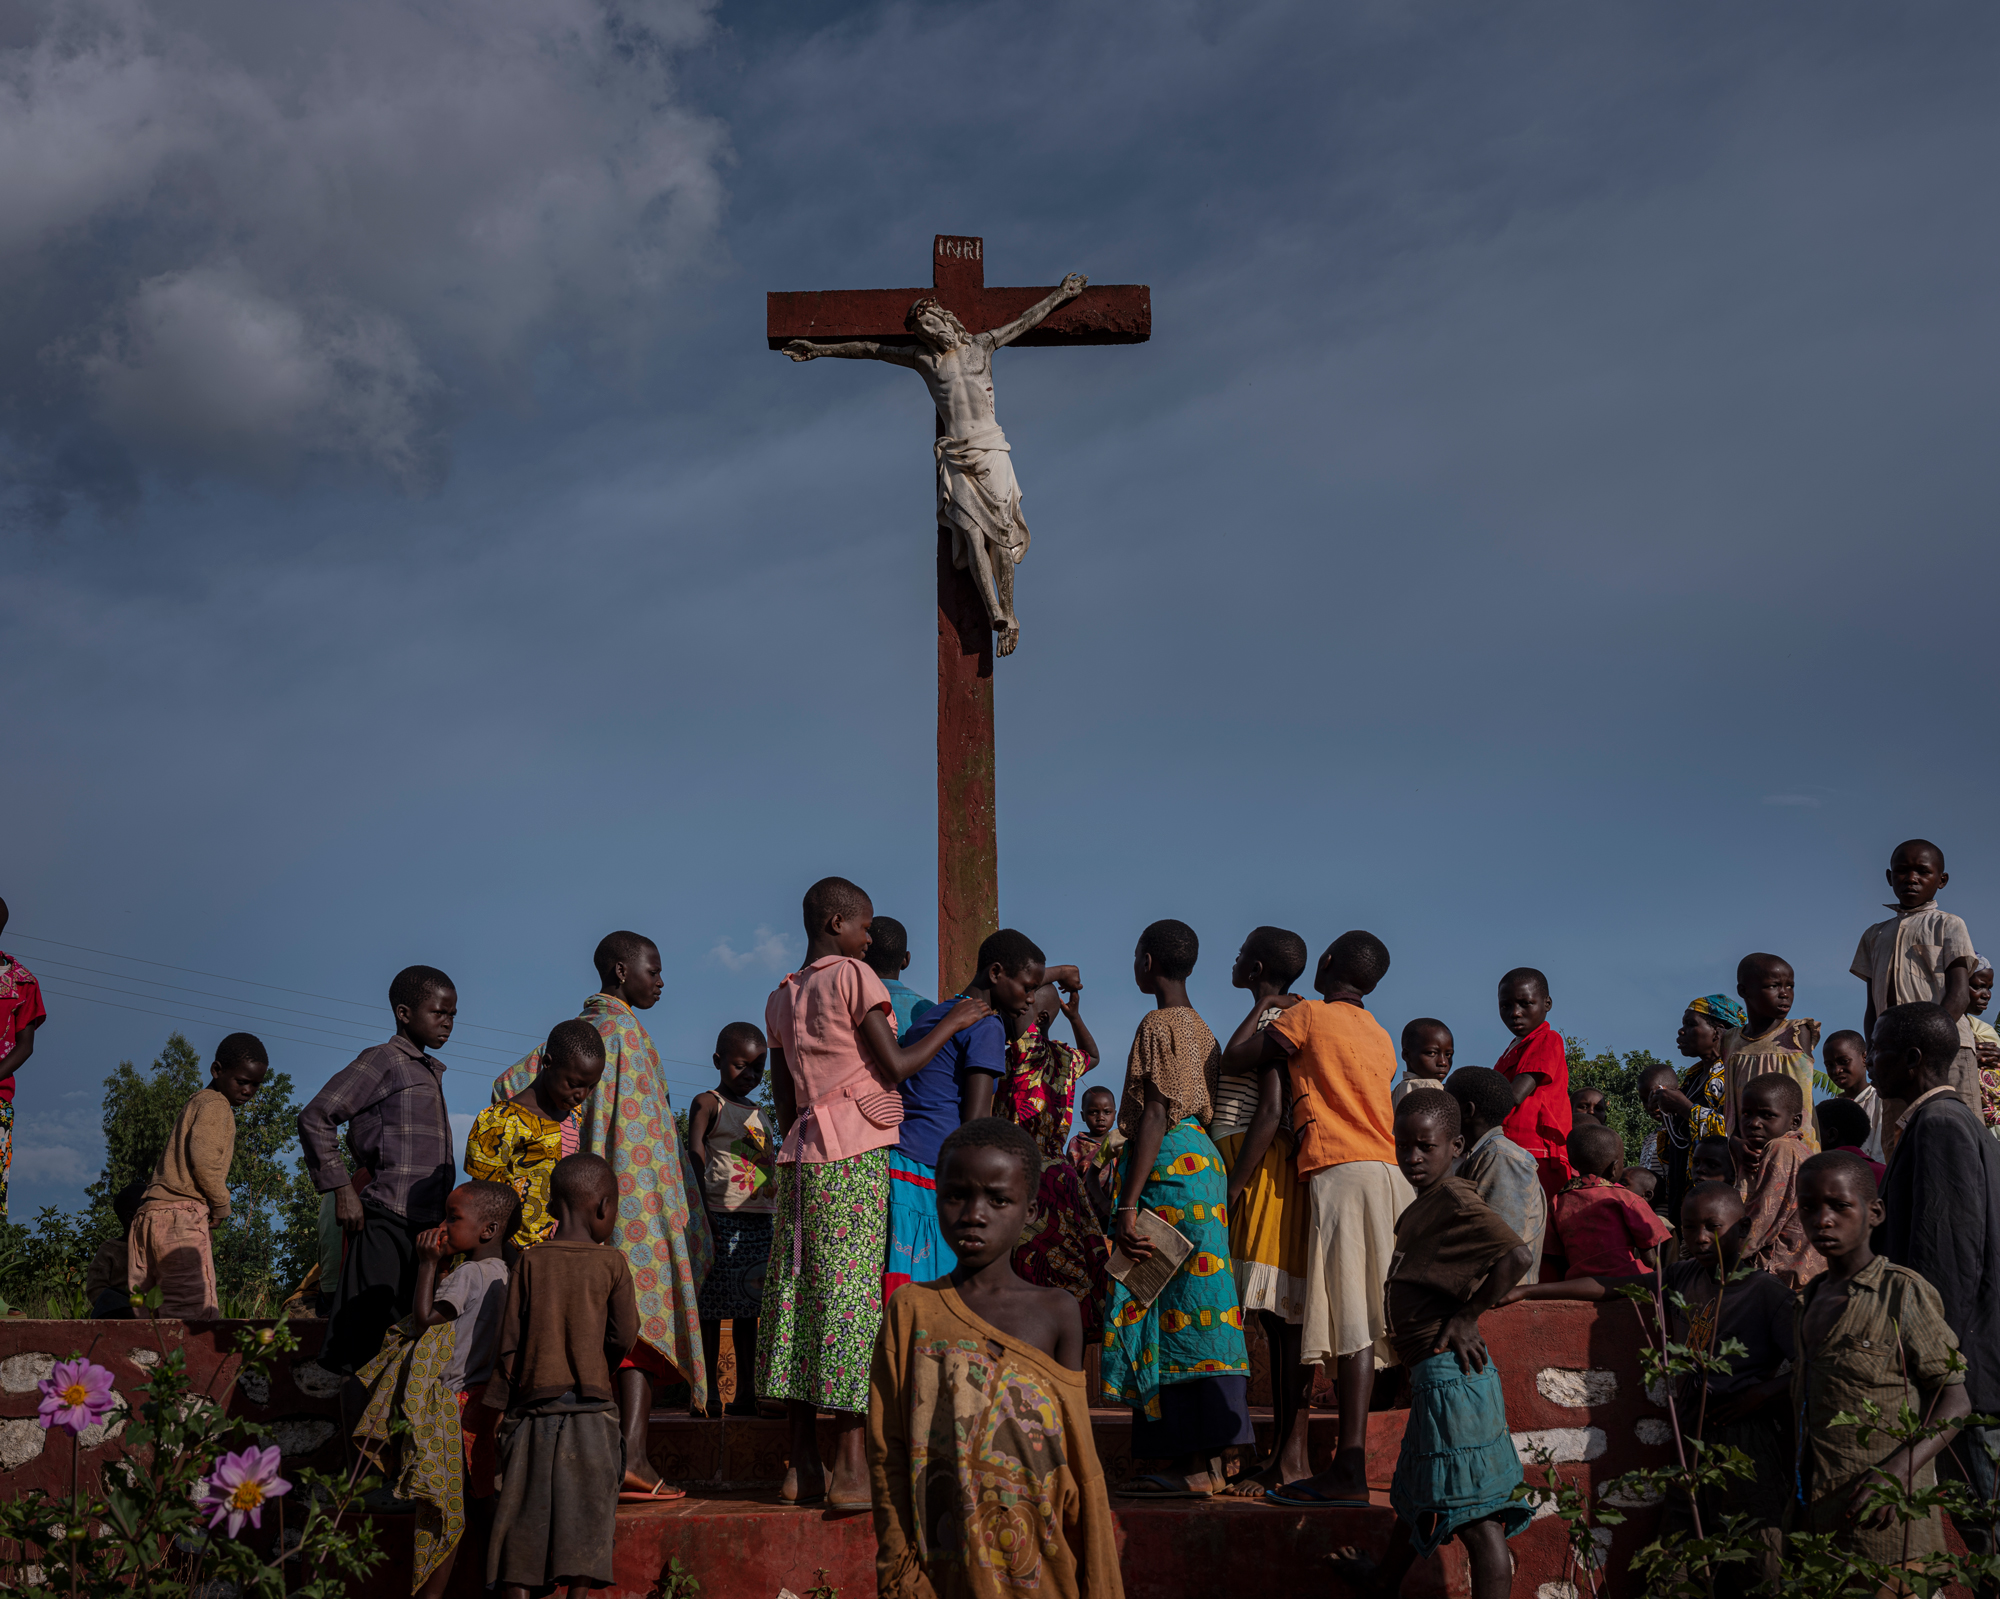 People gather near a large cross by the main road in Drodro.